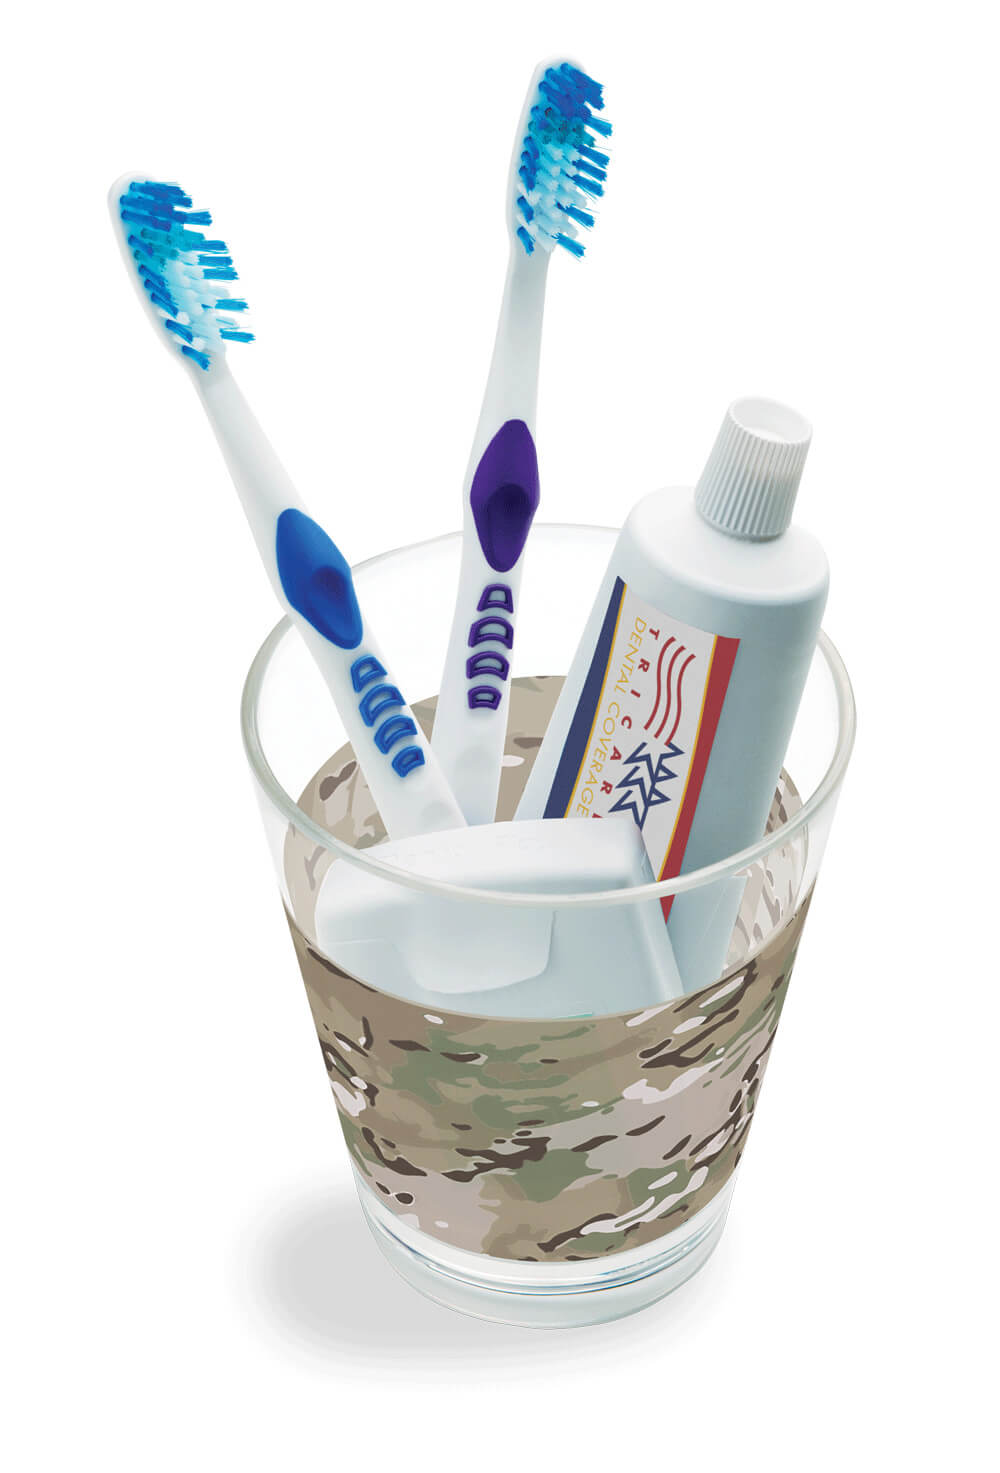 Get Orally Fit with TRICARE Dental CitizenSoldier